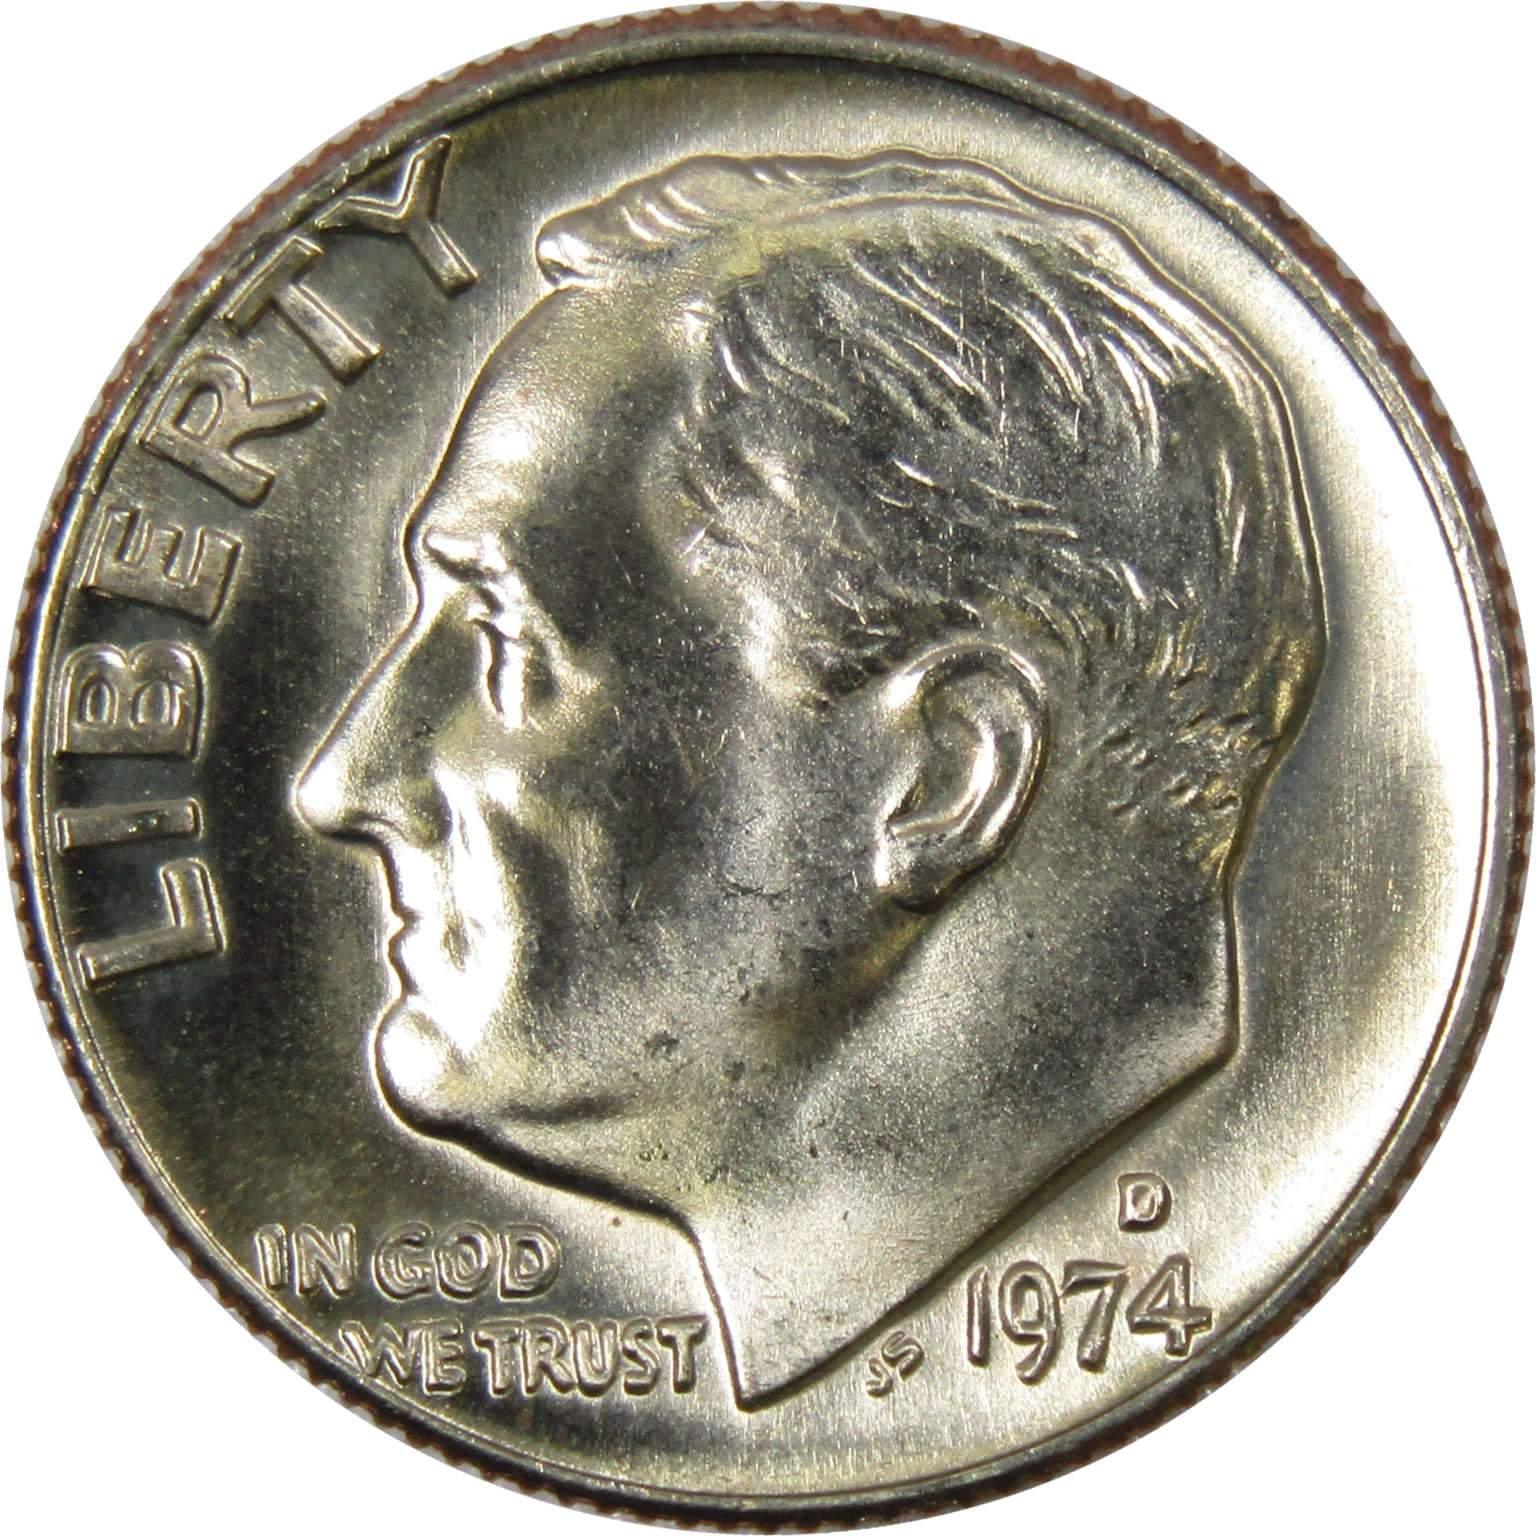 1974 D Roosevelt Dime BU Uncirculated Mint State 10c US Coin Collectible